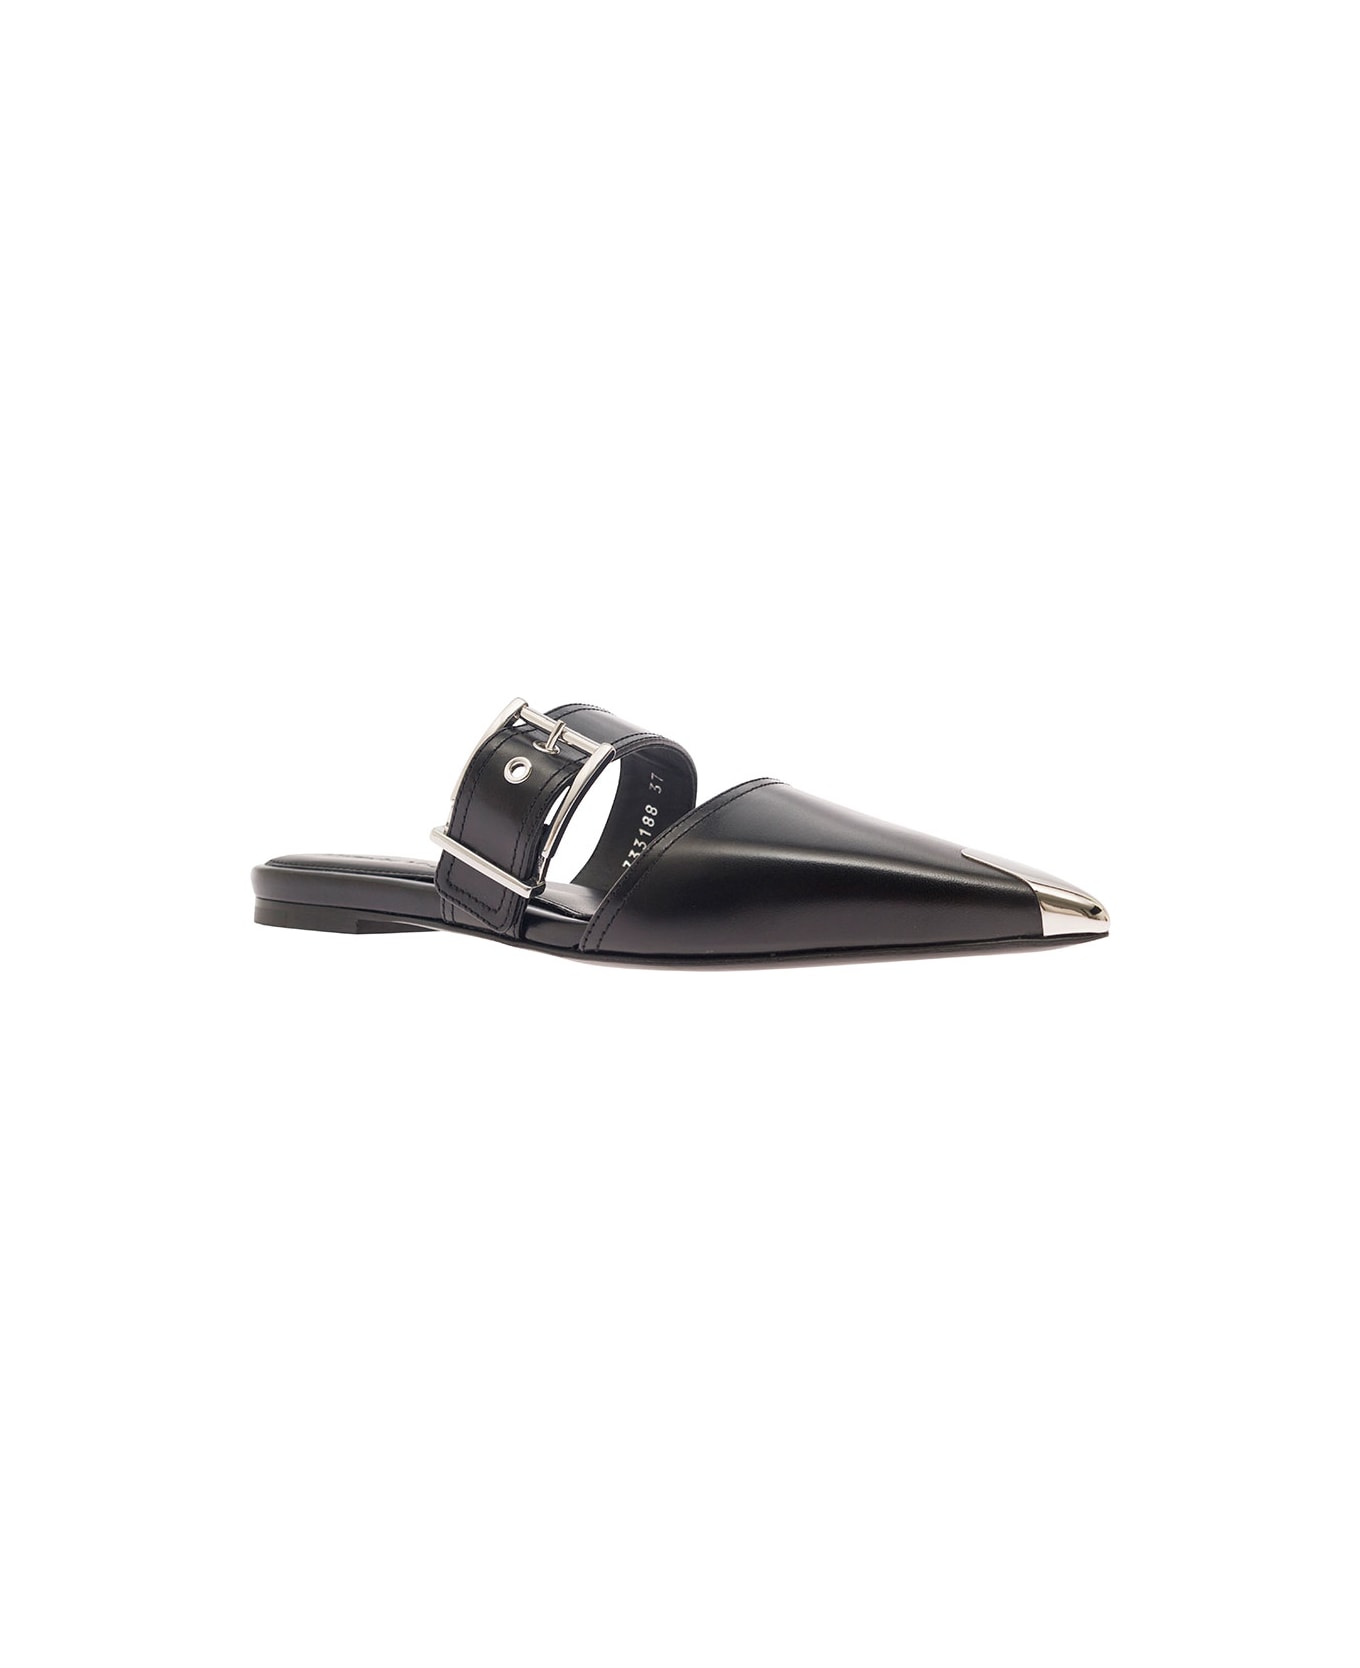 Alexander McQueen 'punk' Black Mules With Metal Tip In Leather Woman - Black サンダル